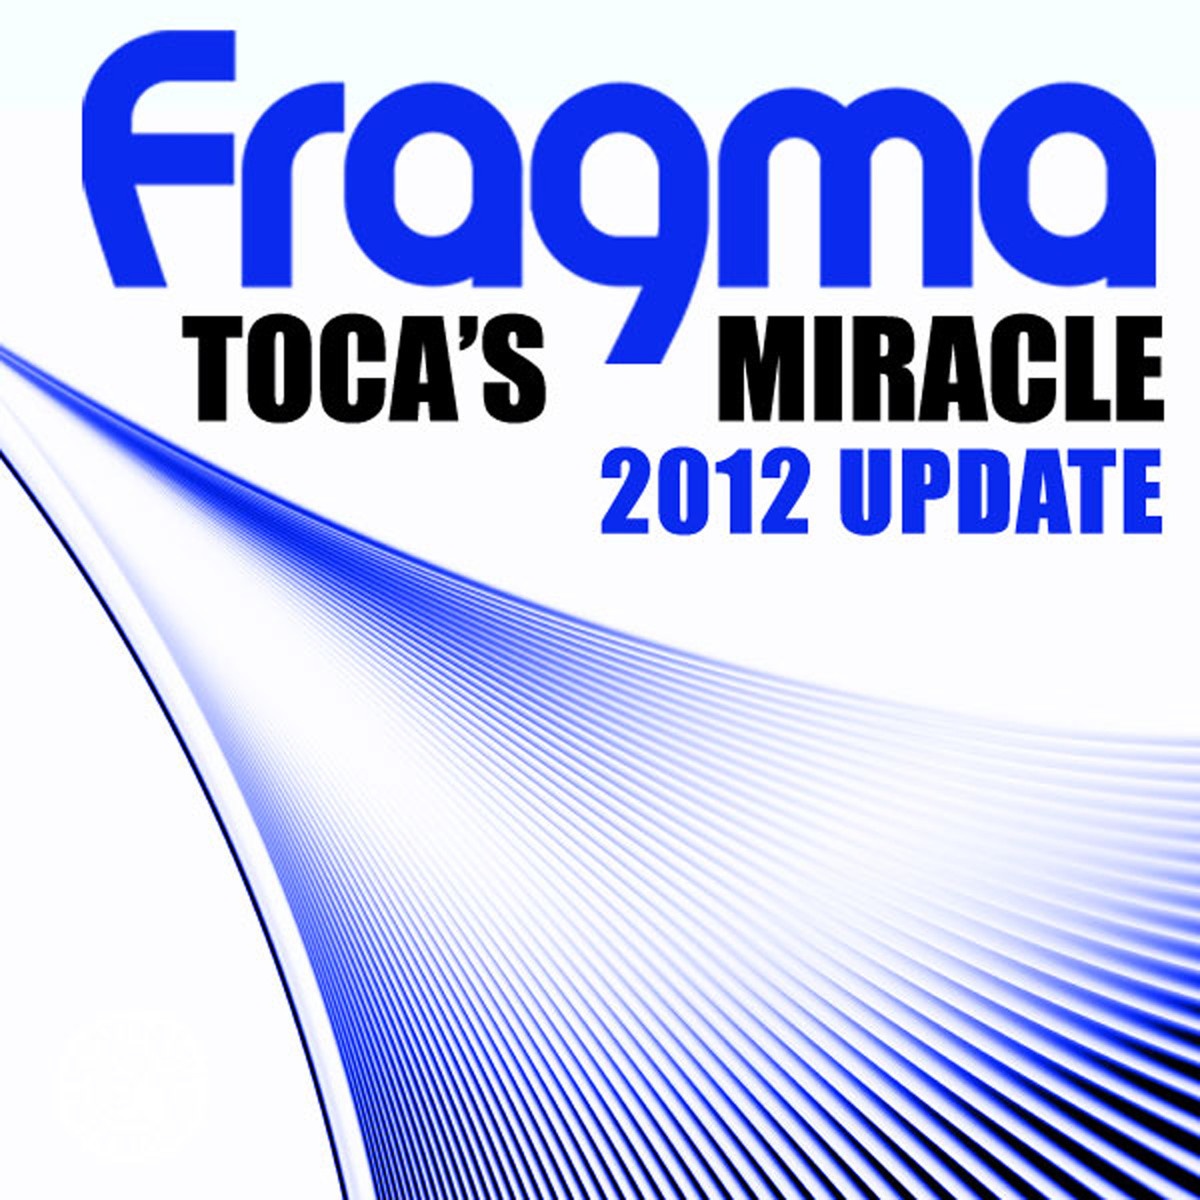 Toca's Miracle (Jerome Isma-Ae & Weekend Heroes Remix) (2012 Update)